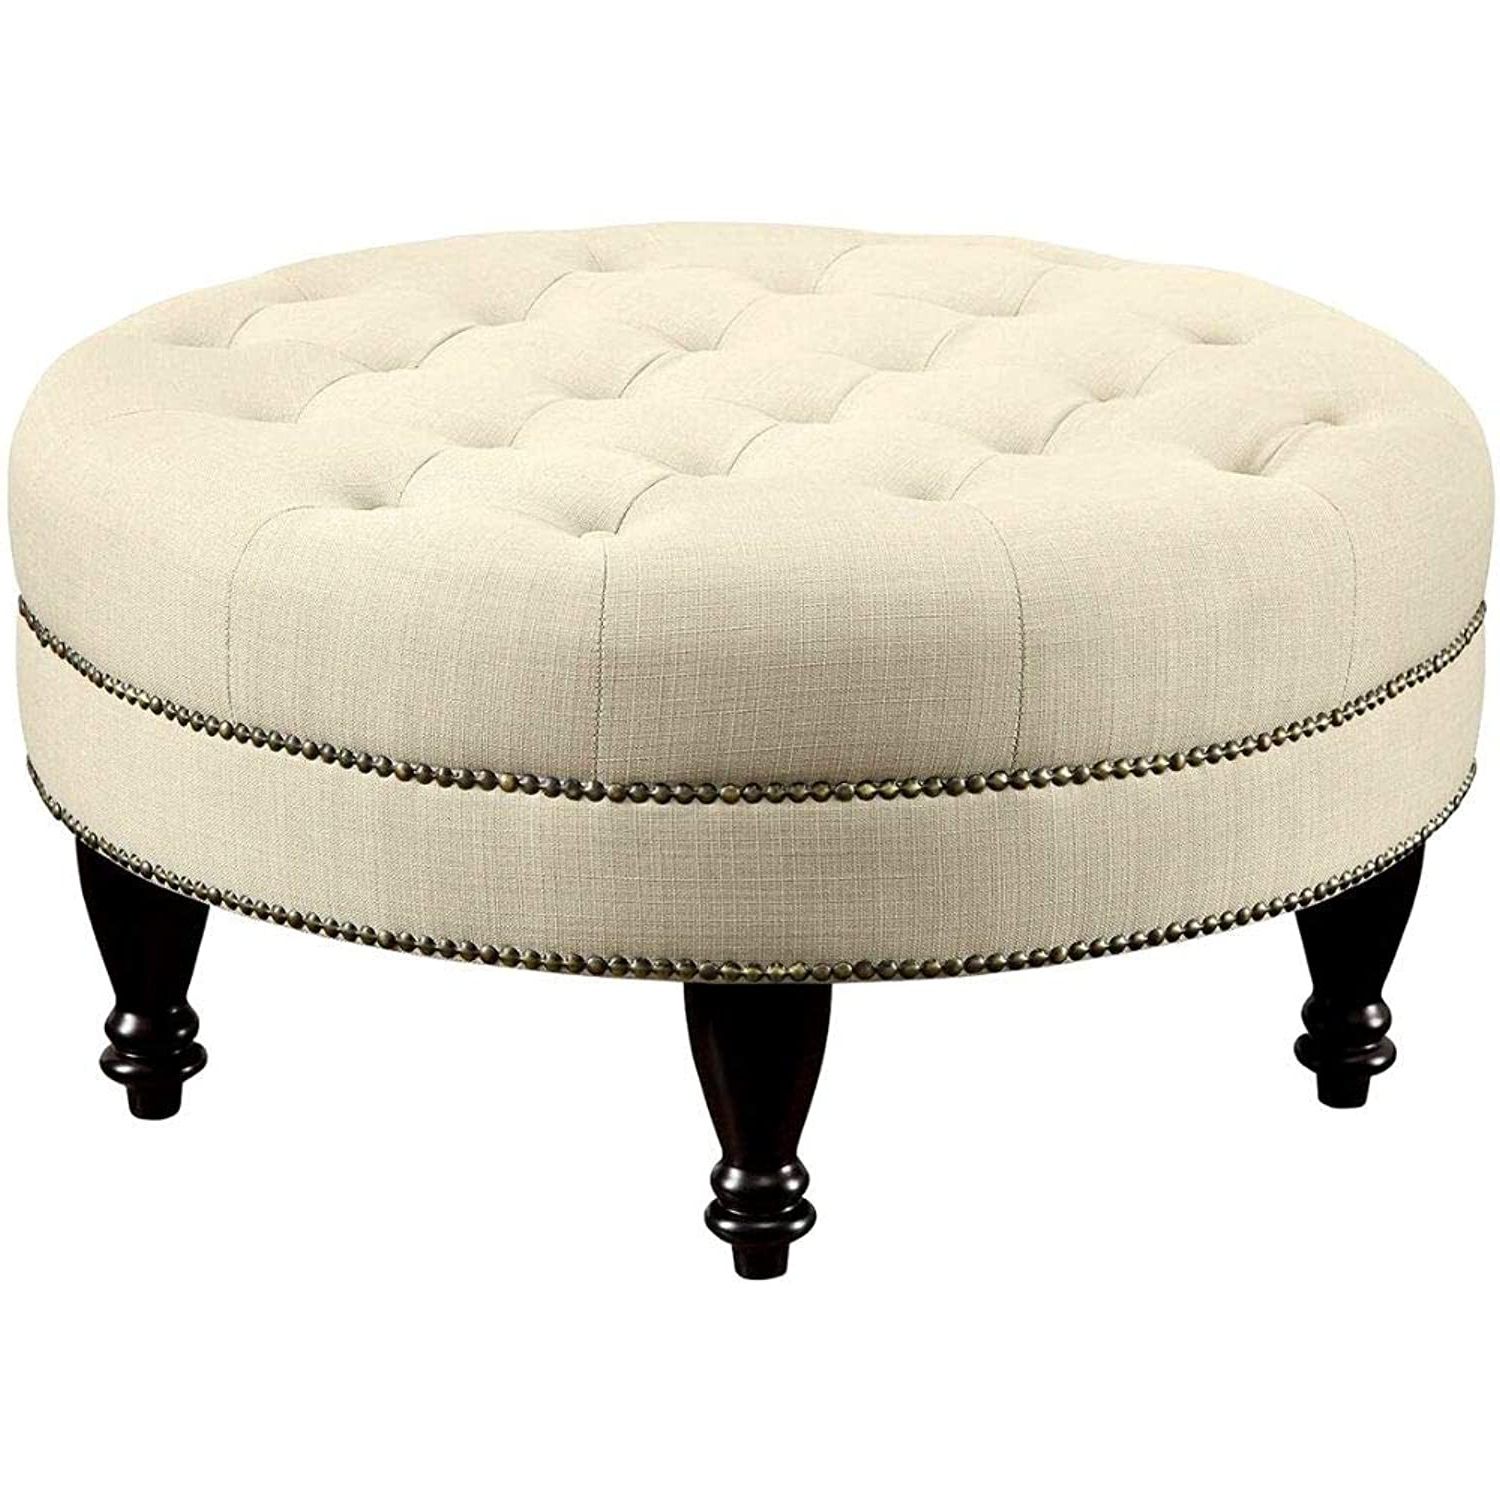 Multi Color Botanical Fabric Cocktail Square Ottomans In 2018 Amazon: Round Tufted Ottoman Coffee Table Button Traditional (View 7 of 10)